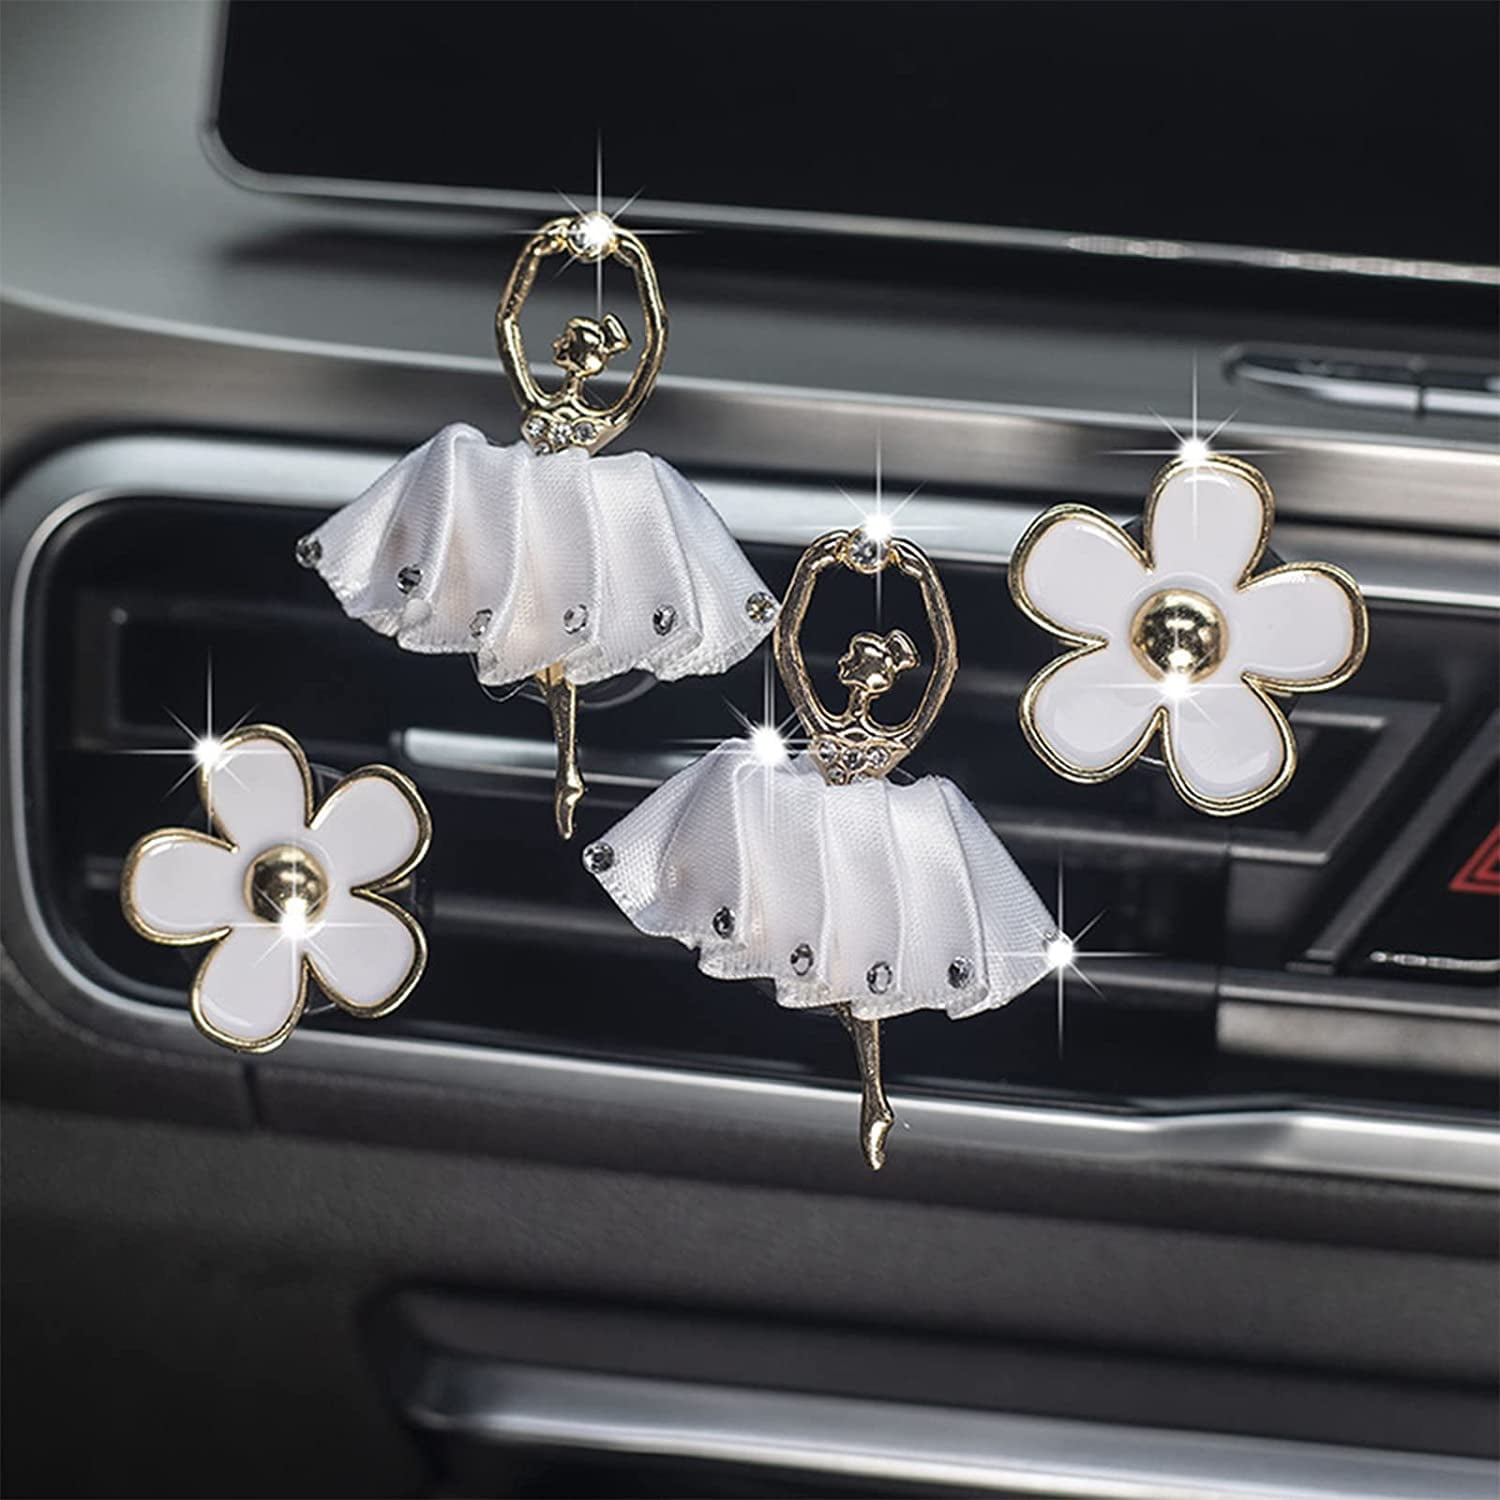 Country Girl Western Car Freshie, Aesthetic Car Air Freshener, Car  Accessories for Women, Car Hanging Accessories, Car Fragrance Decorations